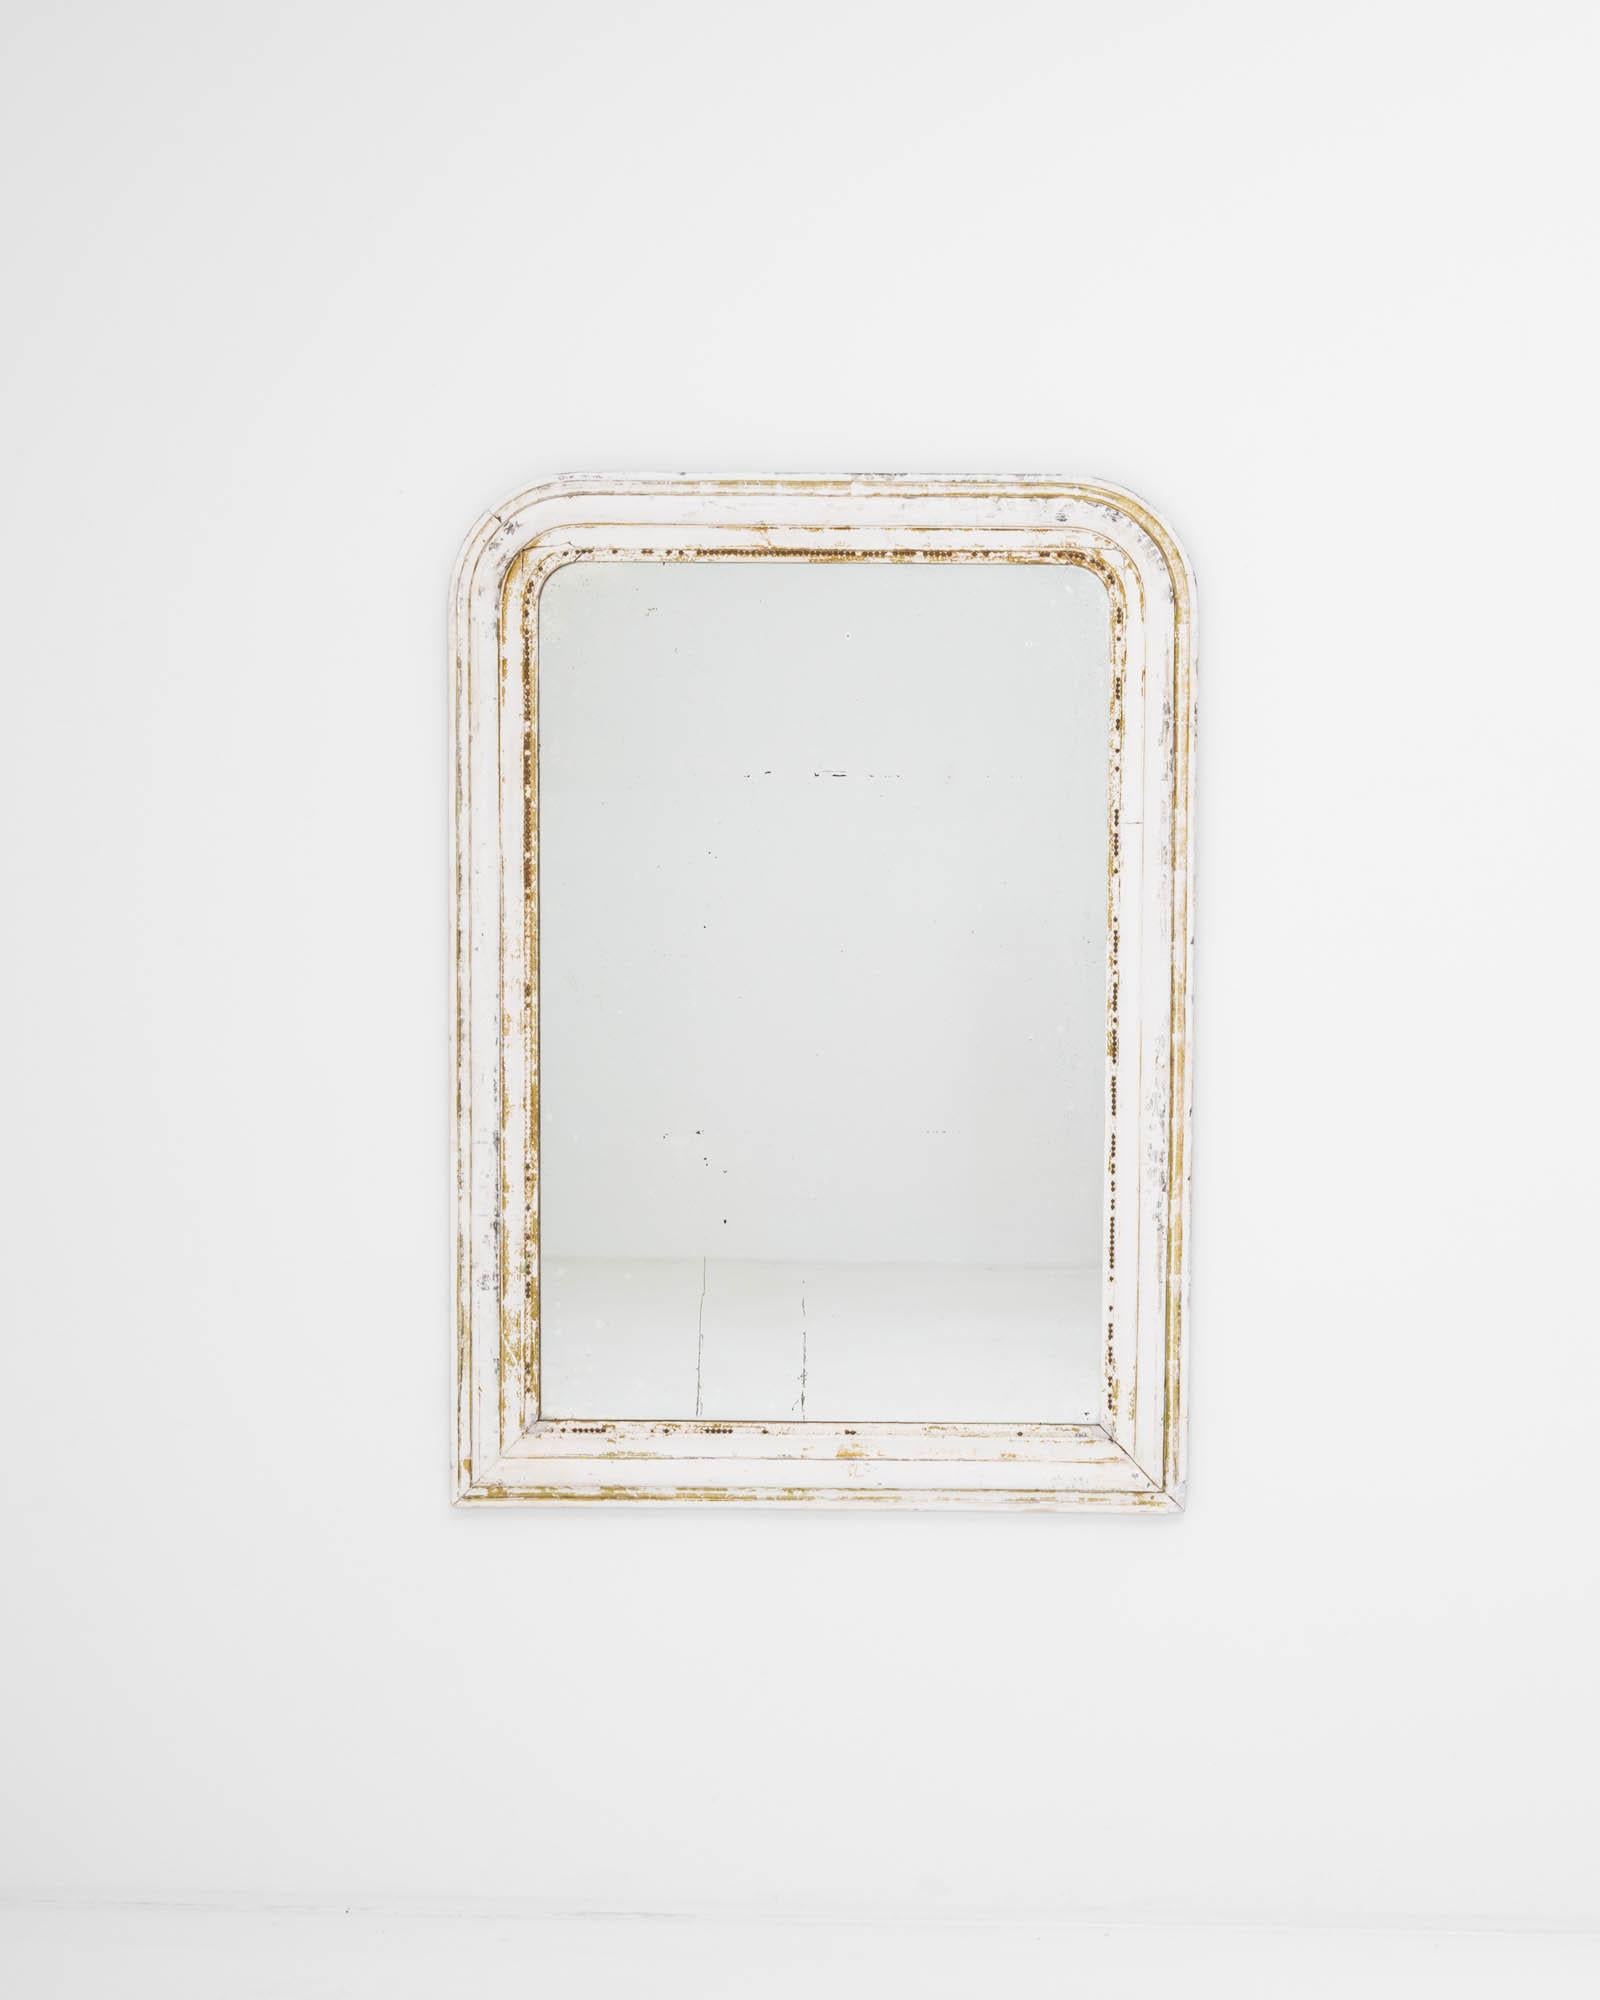 A wooden mirror created in 19th century France. Proudly aged, the white paint has worn to a gentle patina, unveiling warm hues that shine in accord with golden detailing that rings the arched frame. This one of a kind mirror combines traditional